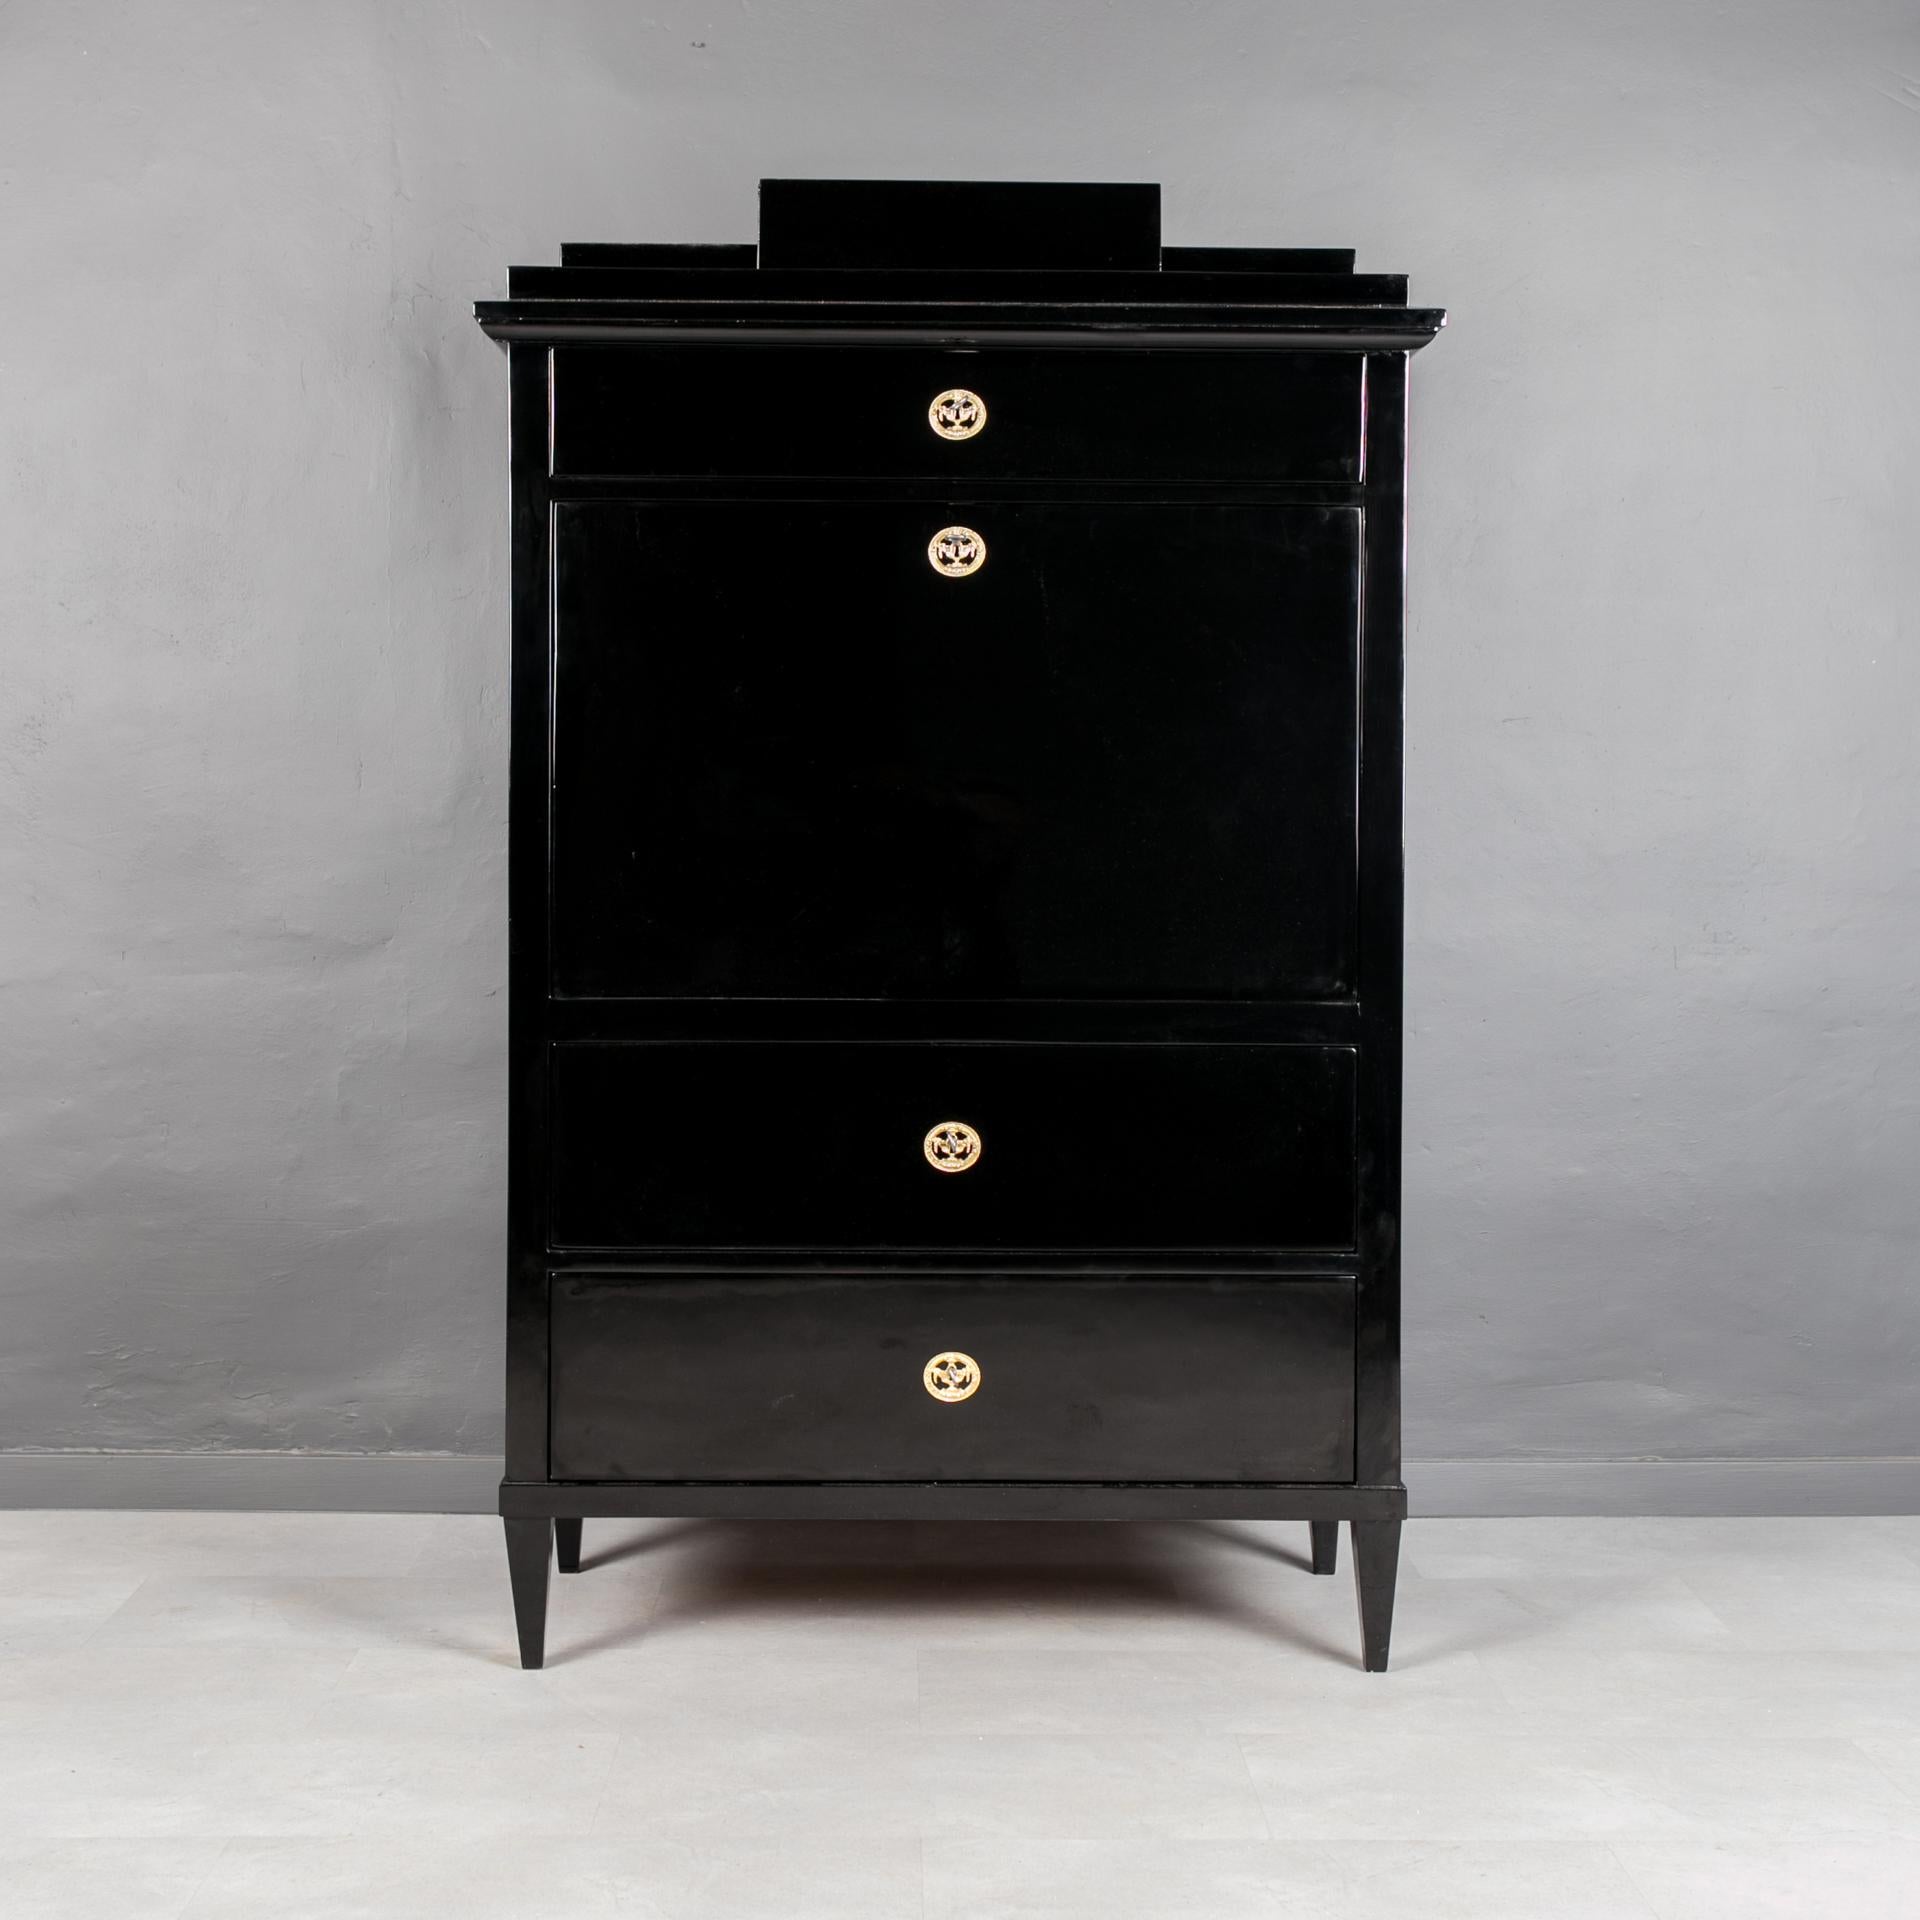 This Biedermeier secretary comes from Austria and was made in 19th century. It is made of coniferous wood, veneered with cherrywood. It has undergone a professional renovation process. Surface finished with black shellac polish applied by hand with